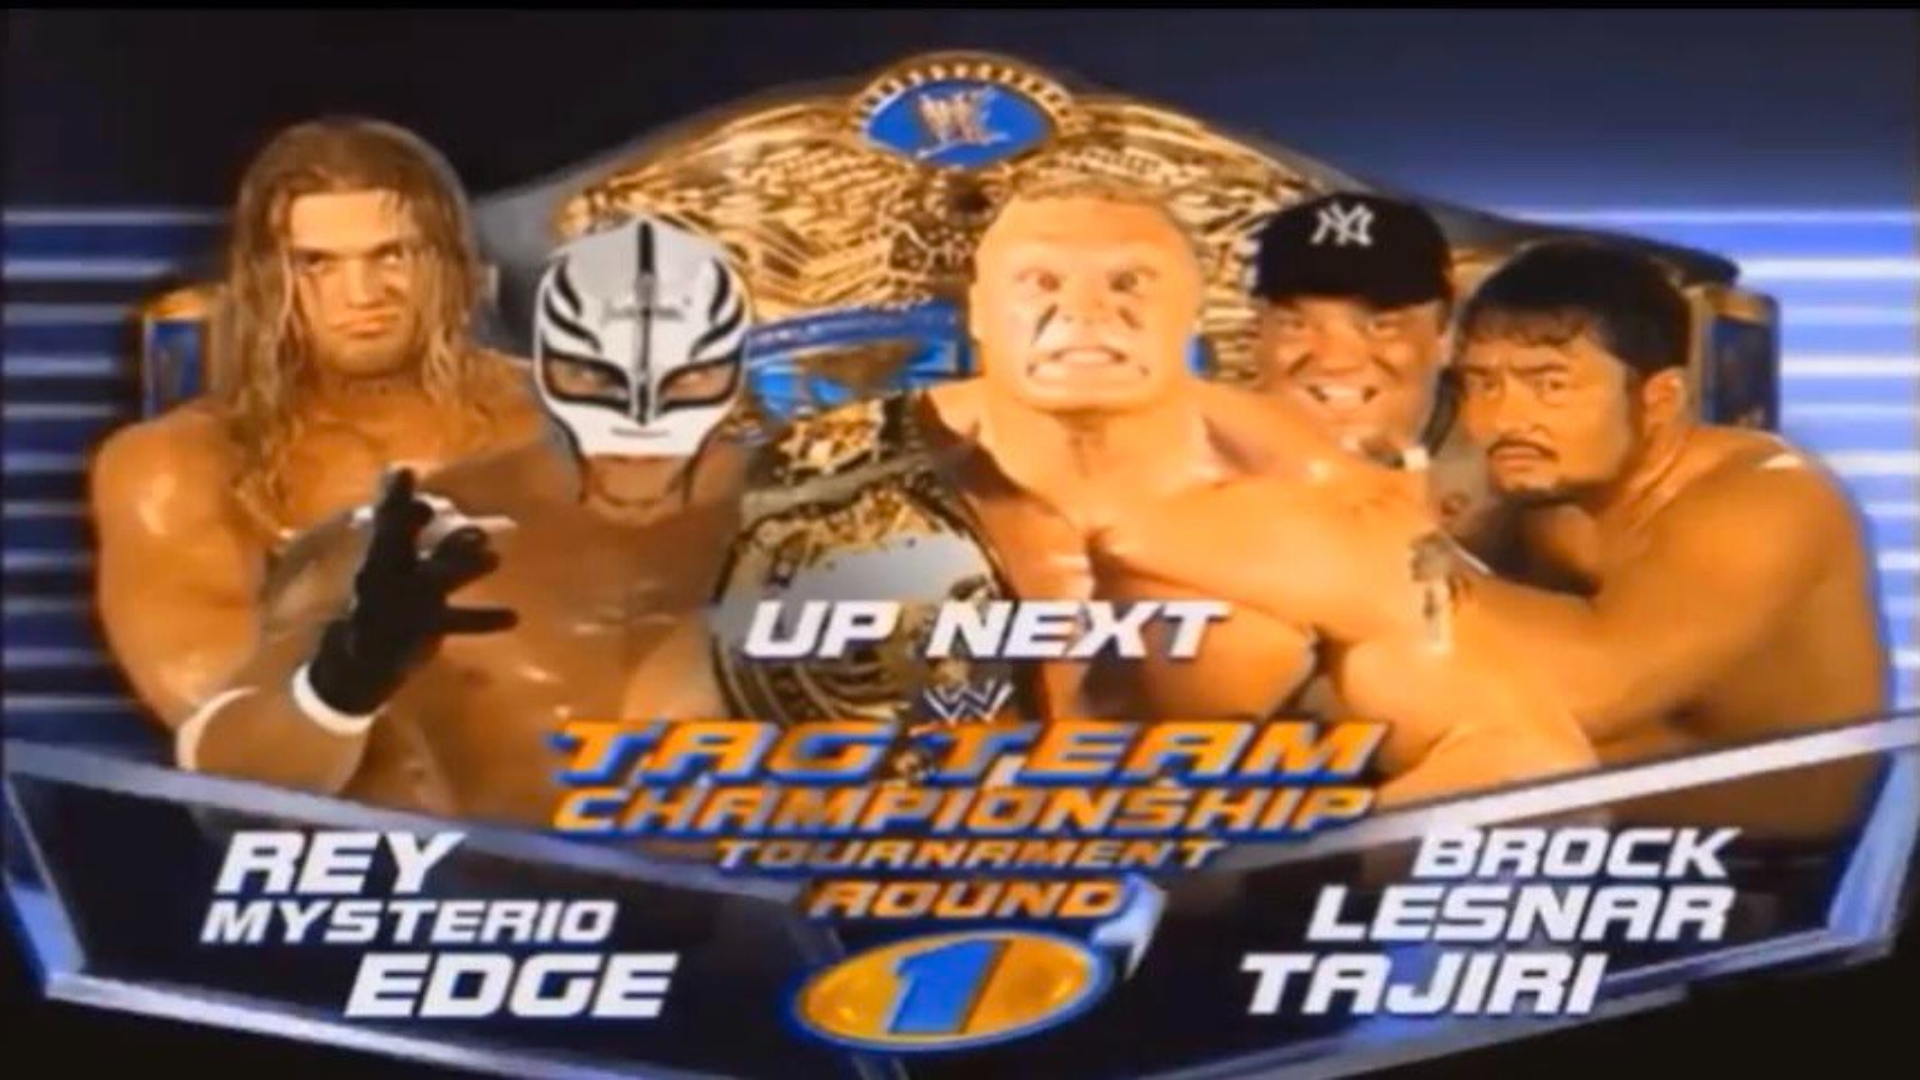 Match of the Day: Rey Mysterio & Edge Vs. Brock Lesnar ...